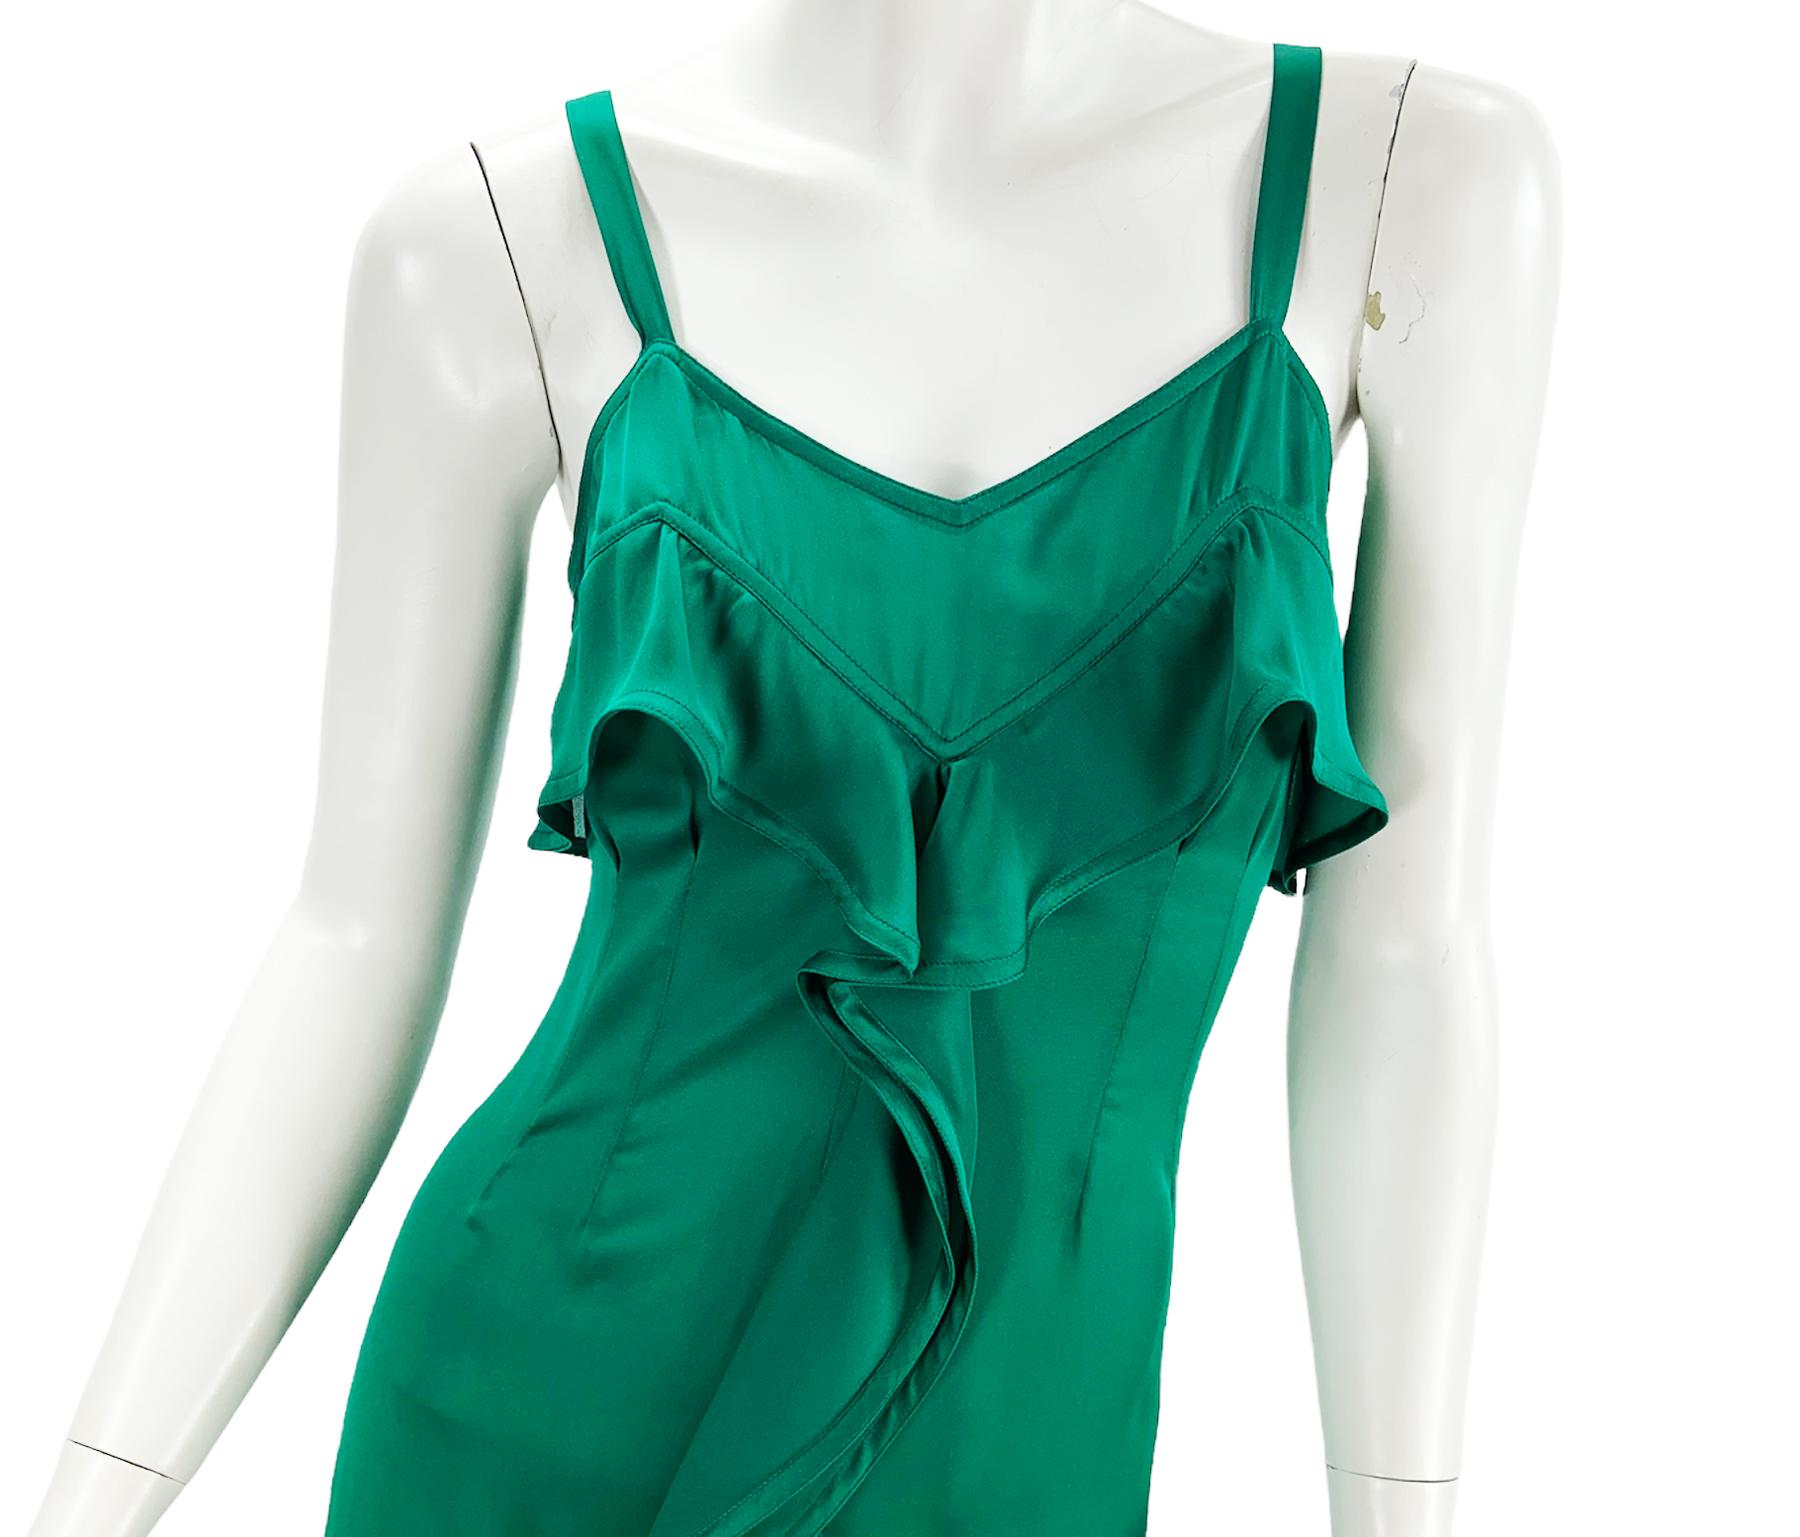 Tom Ford for Yves Saint Laurent AD Campaign F/W 2003 Silk Green Ruffle Dress   For Sale 3